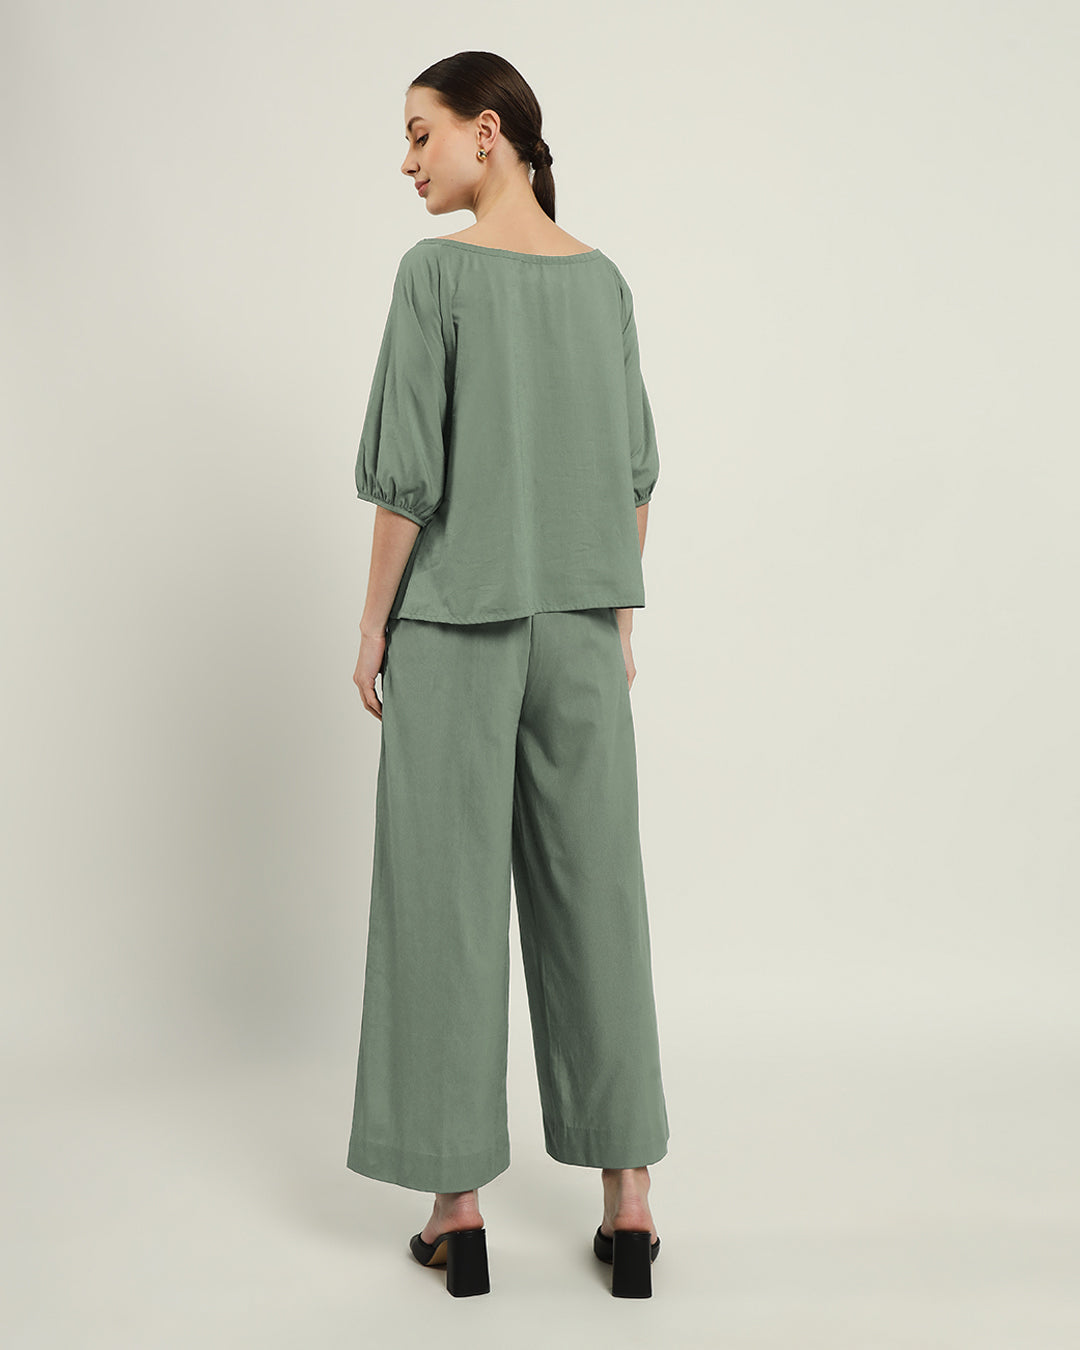 Mint Effortless BowtNeck Top (Without Bottoms)